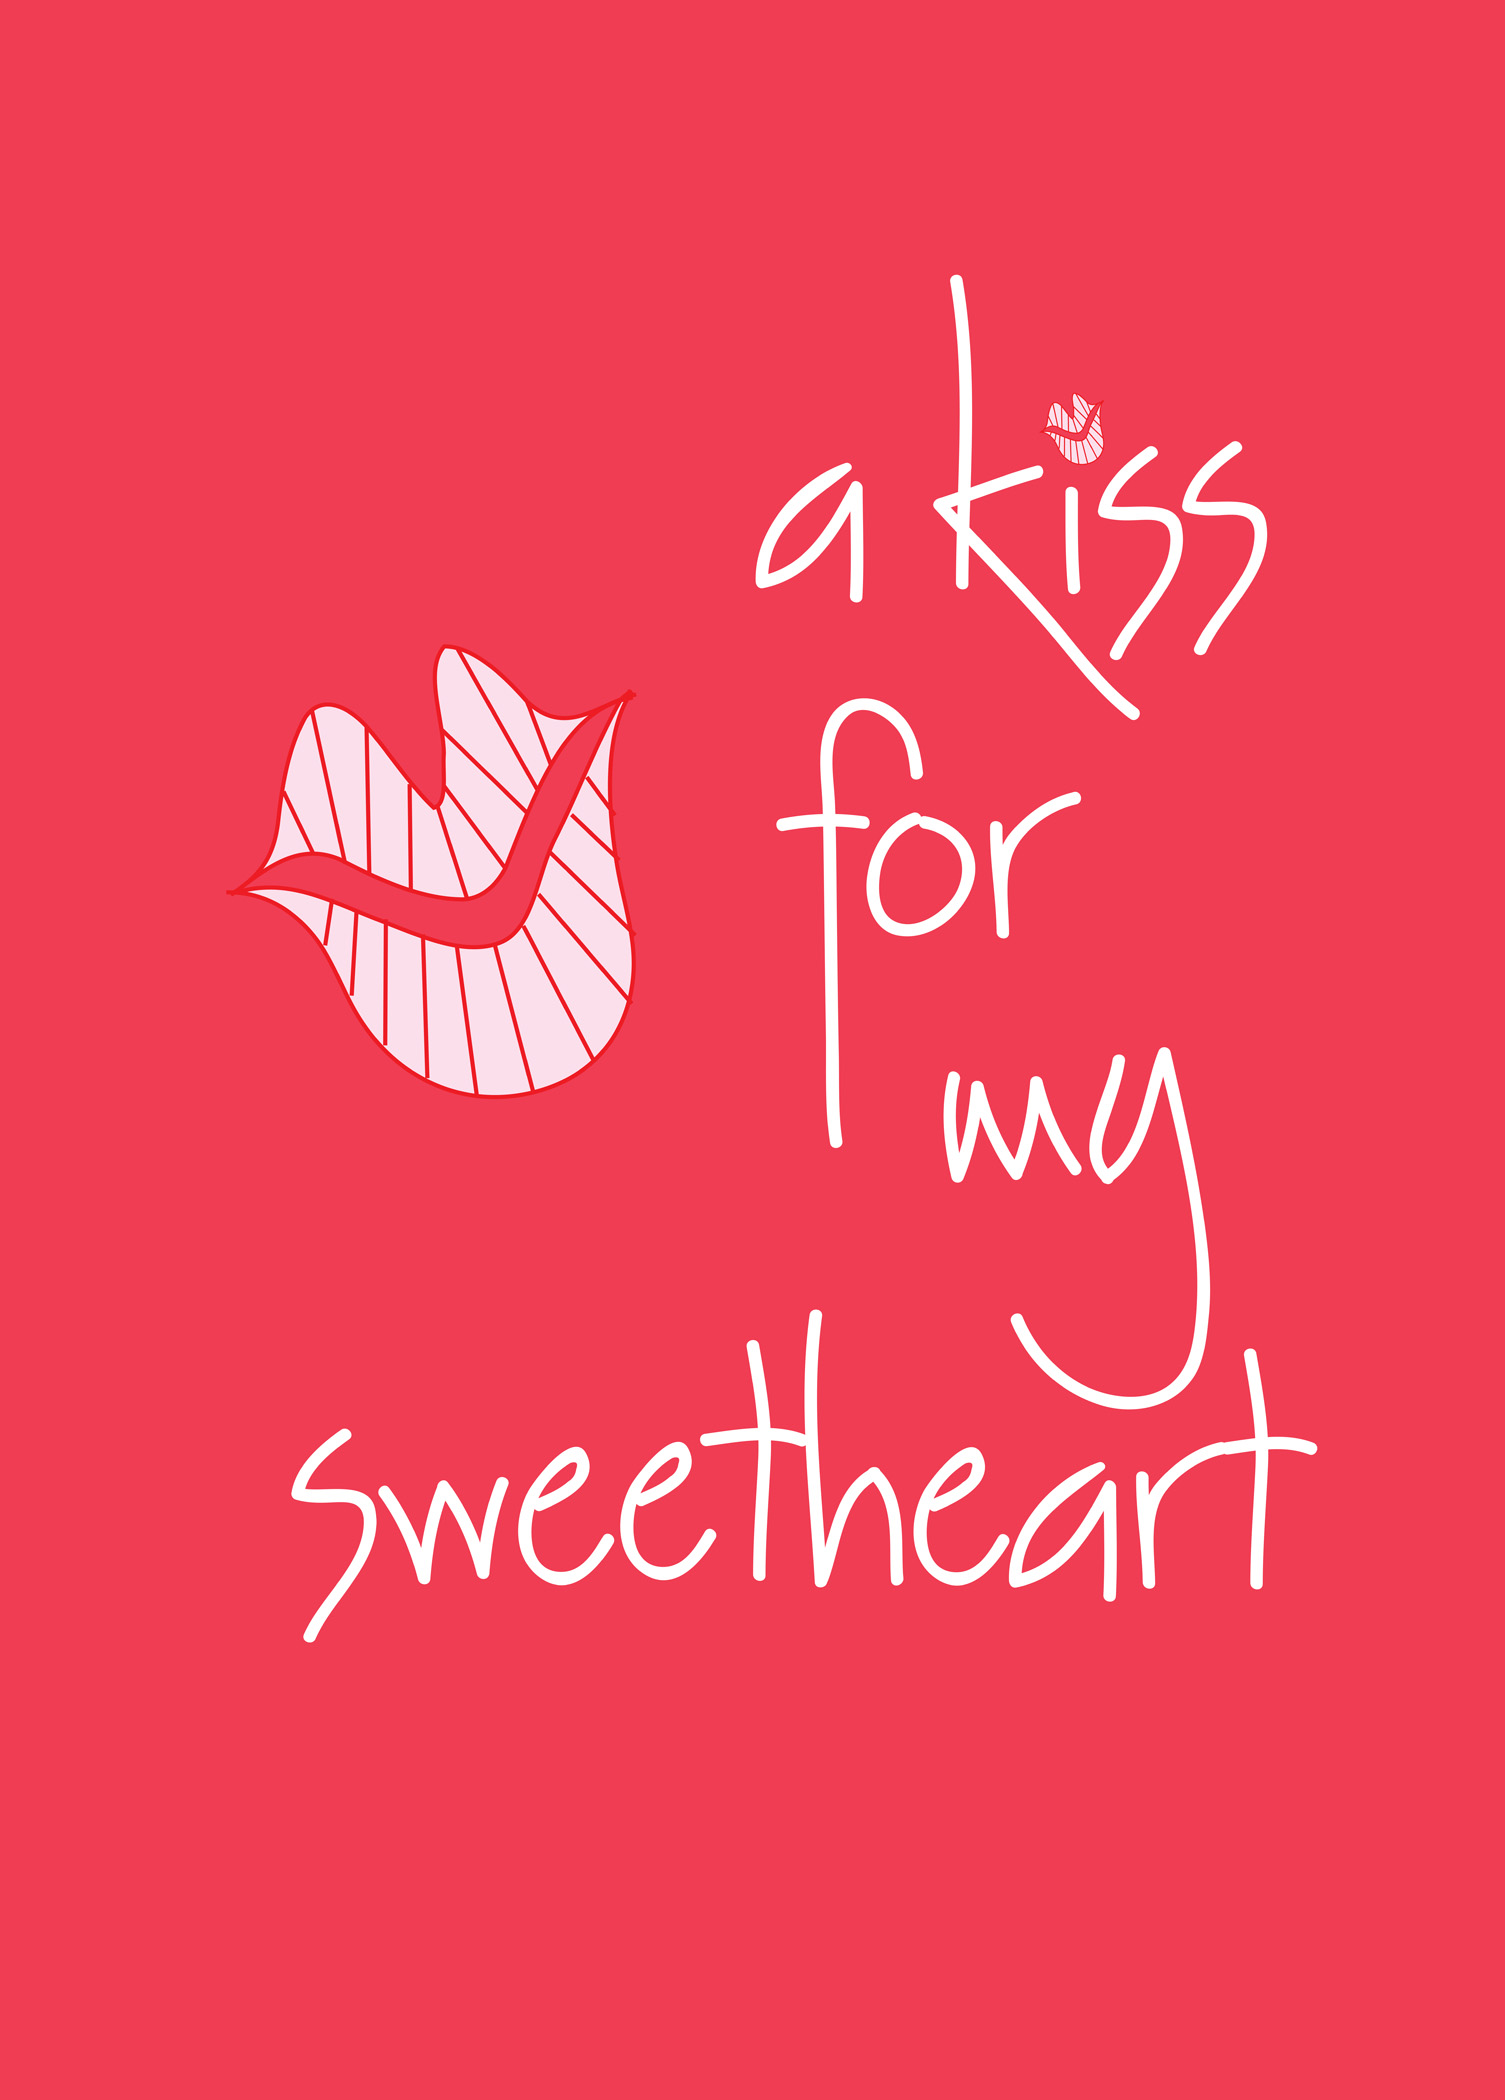 A Kiss for my sweetheart 6